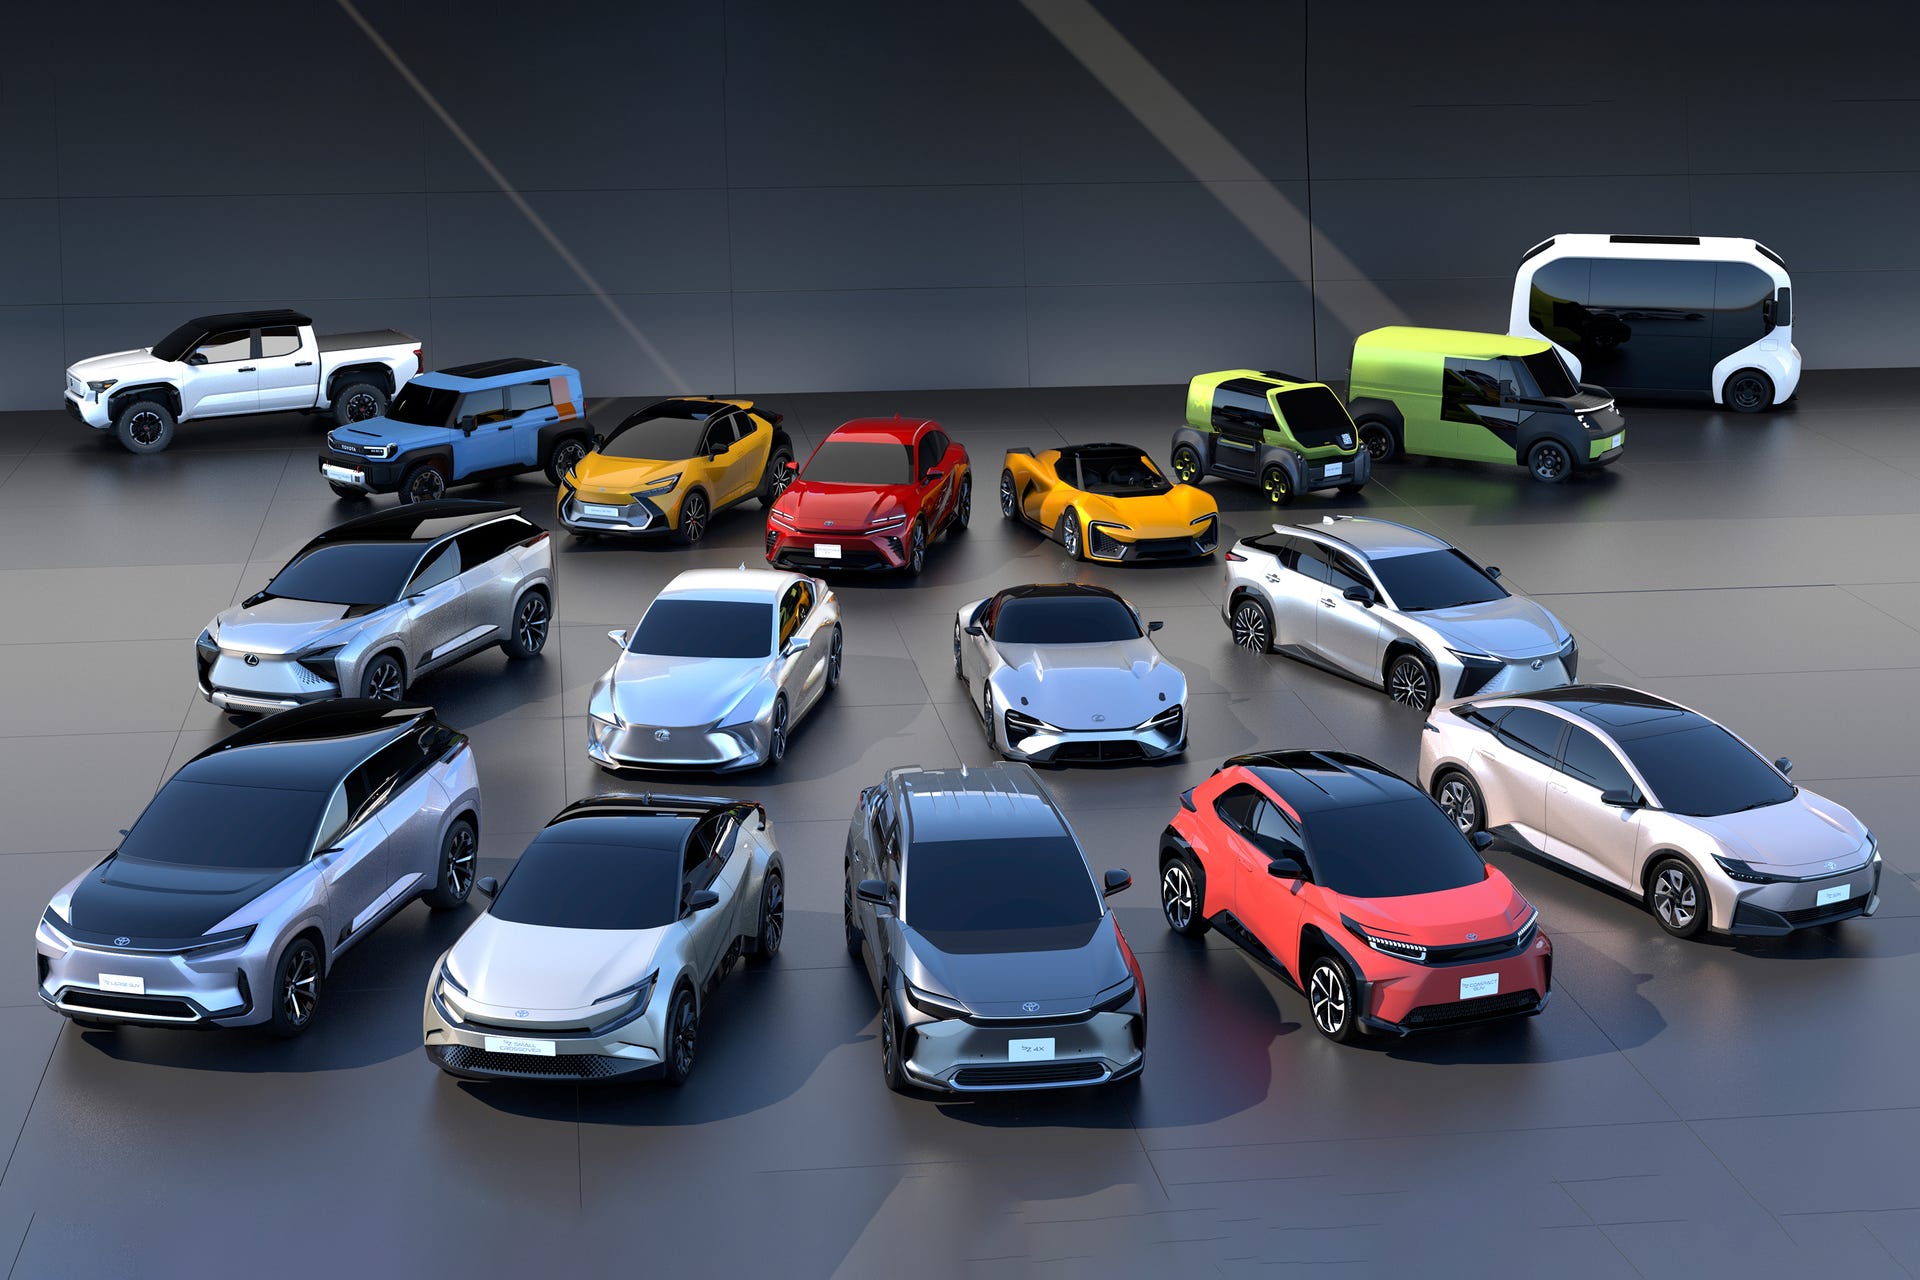 Toyota reveals astounding lineup of future electric cars for 'Beyond